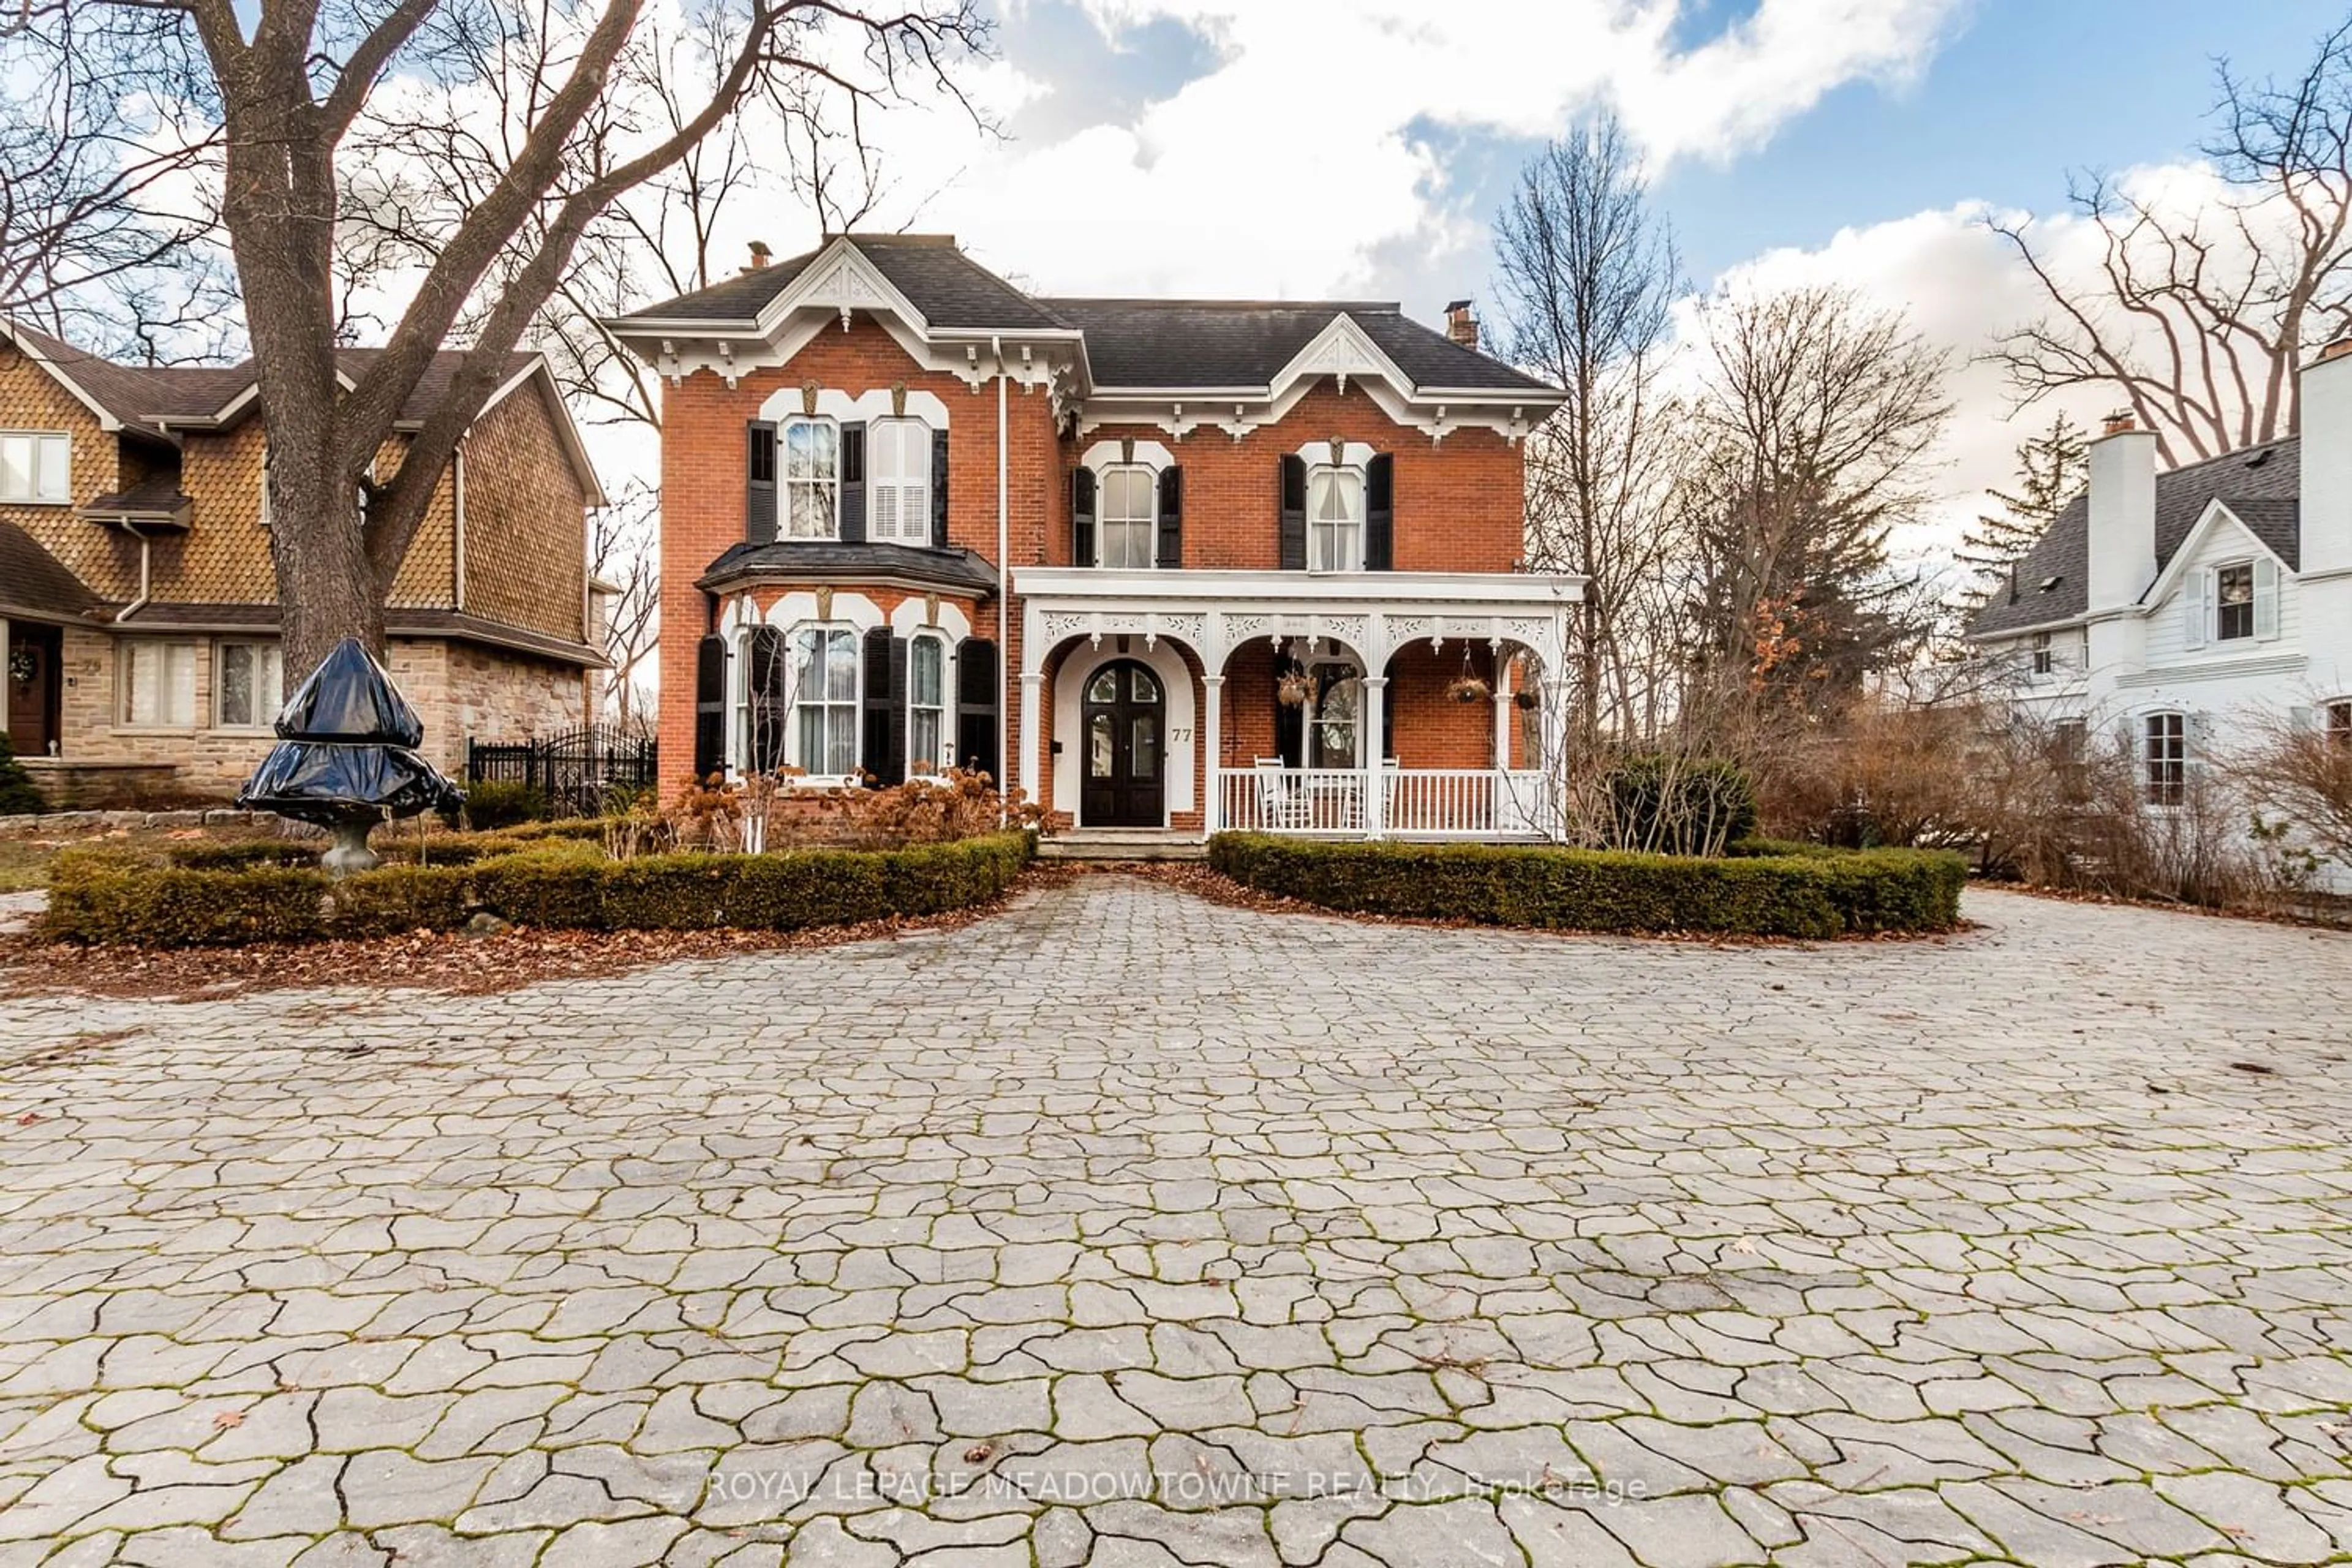 Home with brick exterior material for 77 Main St, Brampton Ontario L6Y 1M9